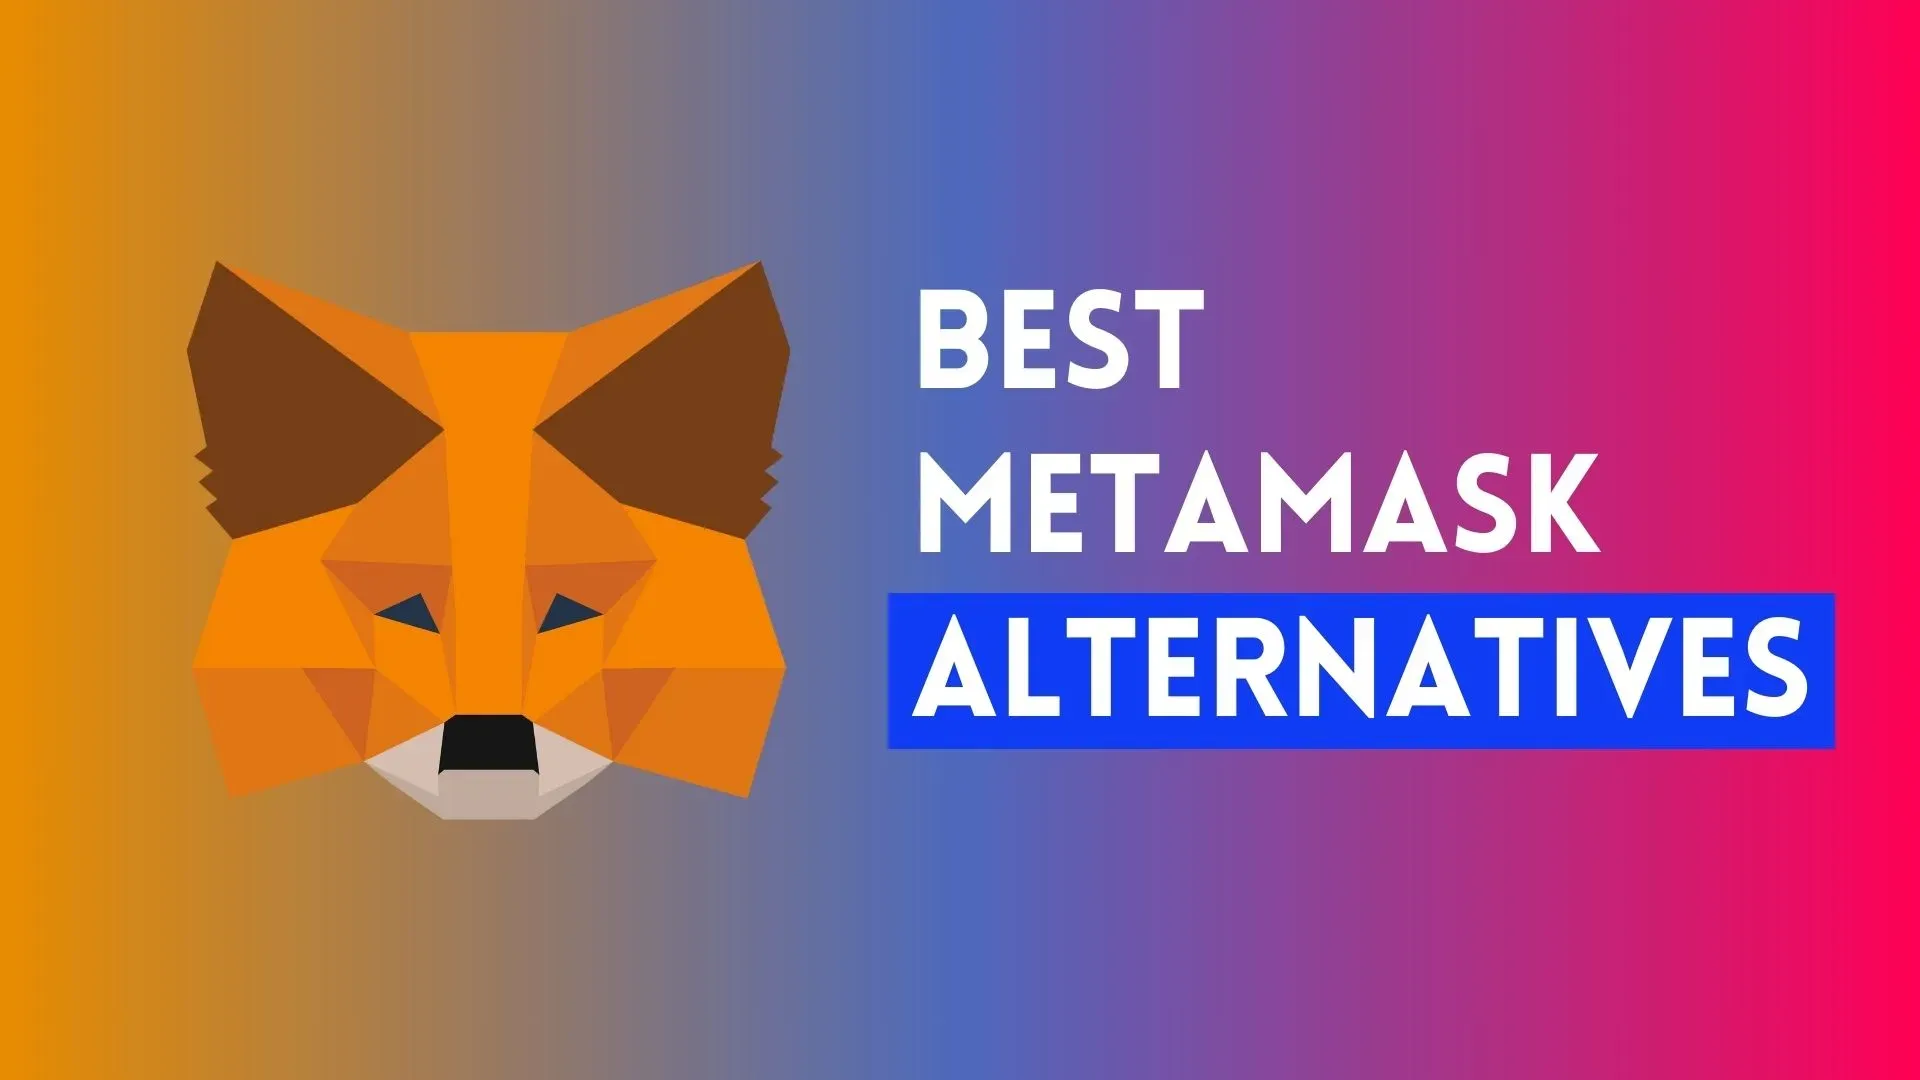 7 Best MetaMask Alternatives For Asian Crypto Users